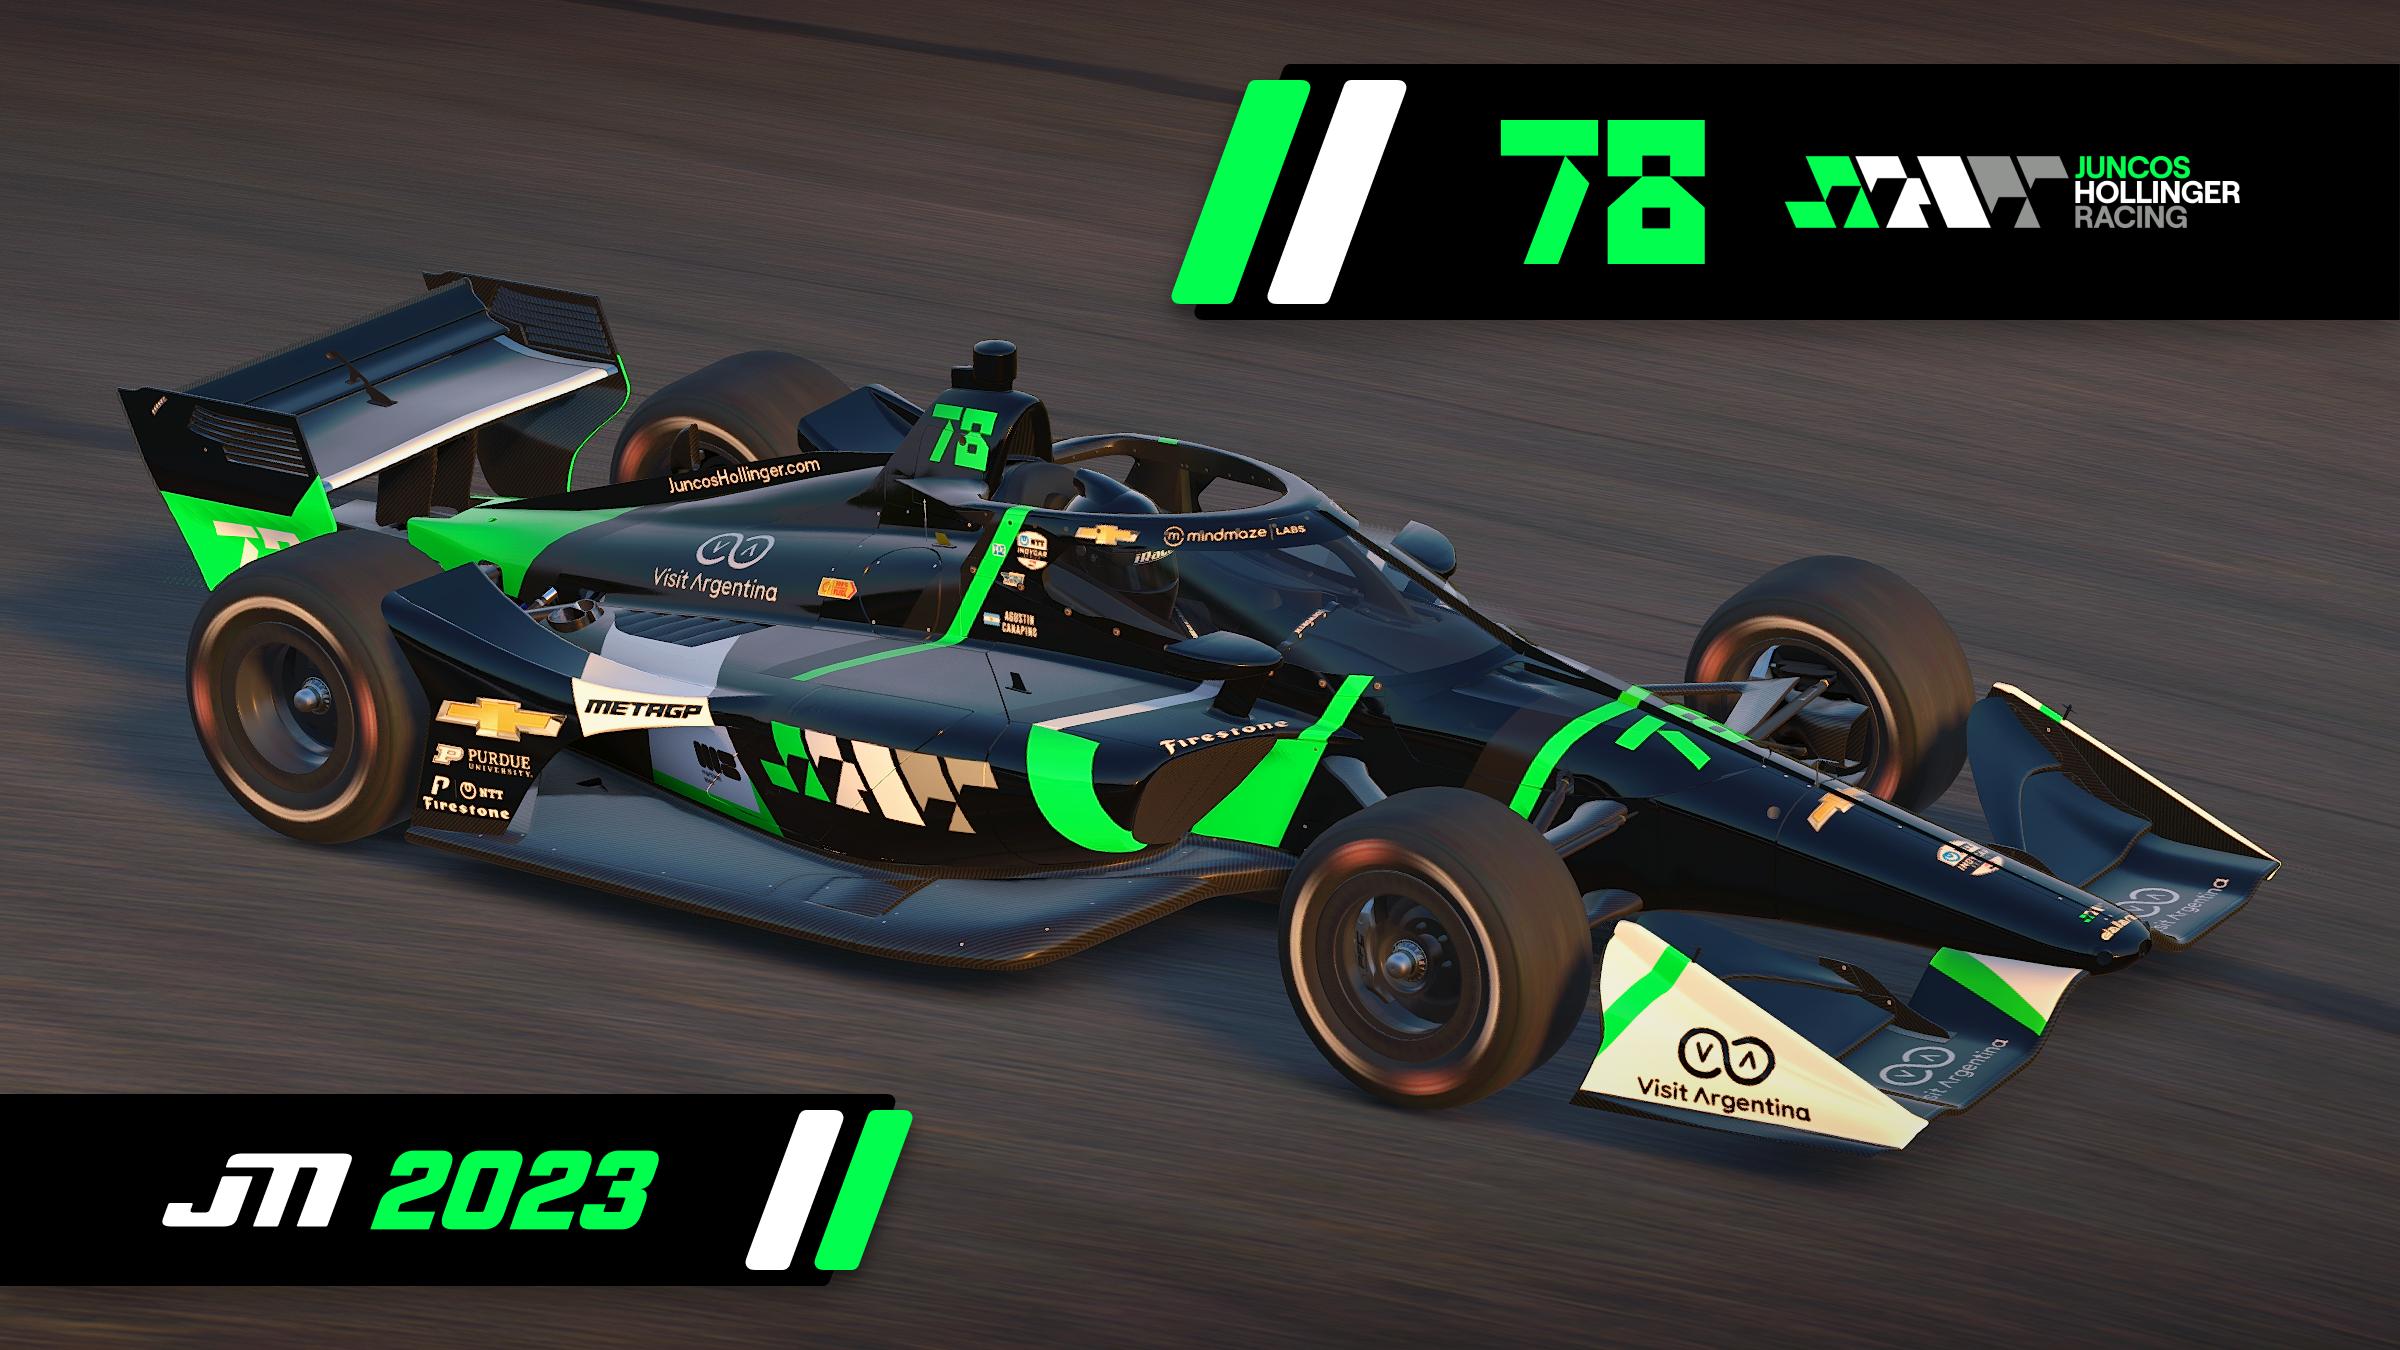 Preview of 2023 Agustin Canapino #78 Juncos Hollinger Racing Dallara IR18 with Custom Number by Jeff McKeand